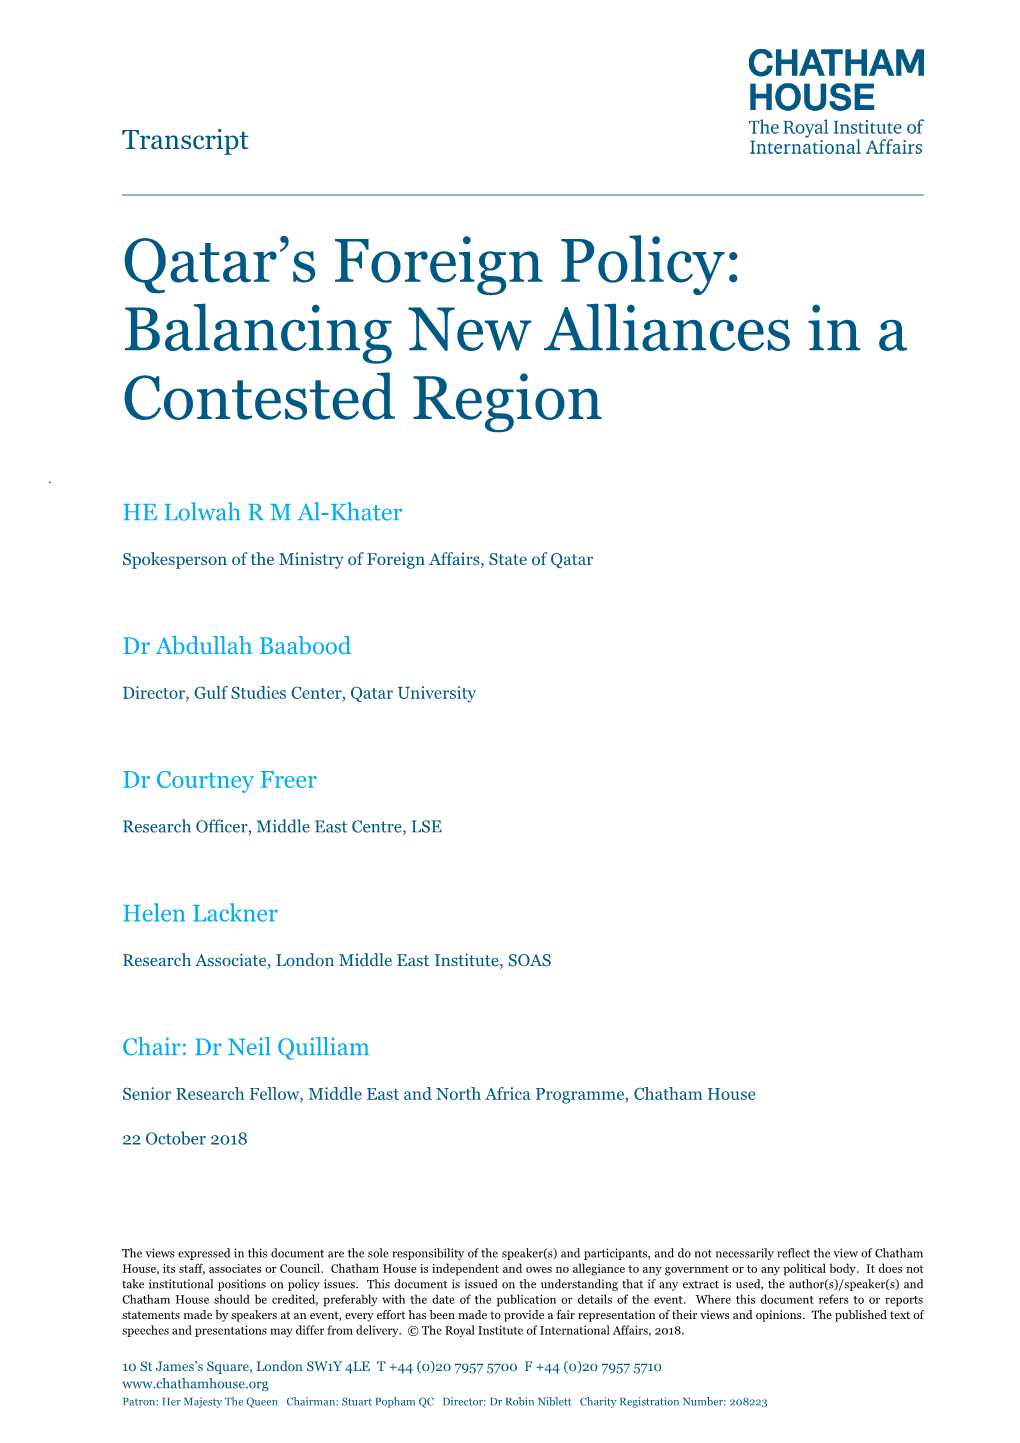 Qatar's Foreign Policy: Balancing New Alliances in A